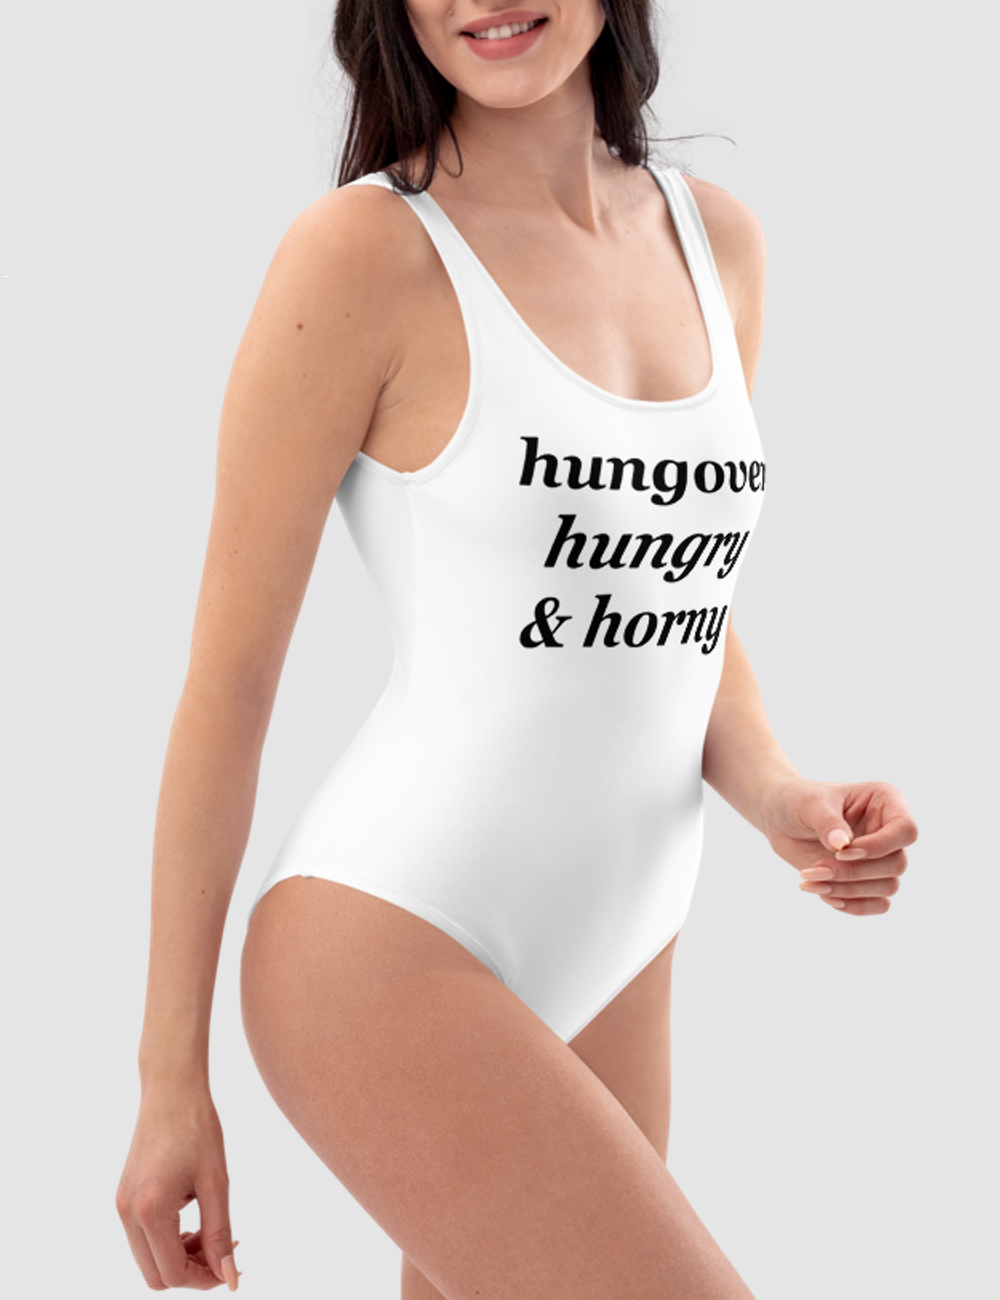 Hungover Hungry & Horny | Women's One-Piece Swimsuit OniTakai